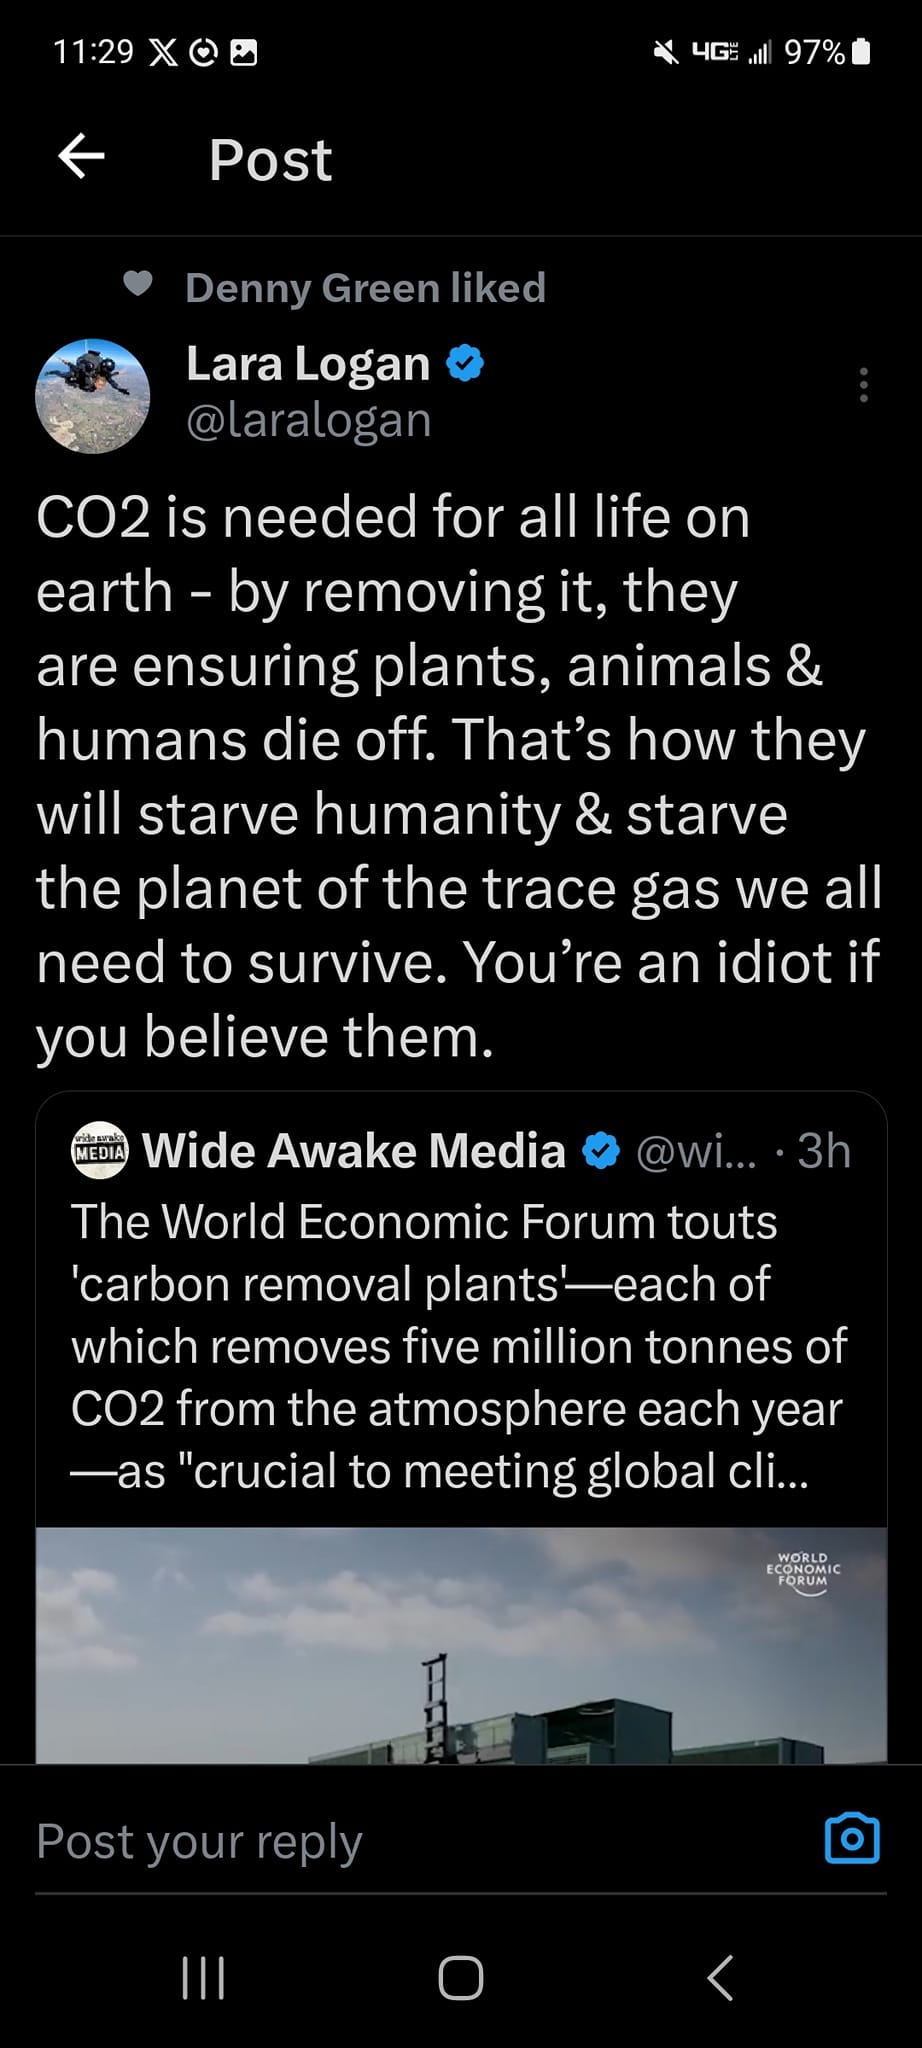 May be an image of text that says '4G 97% Post Denny Green liked Lara Logan @laralogan CO2 is needed for all life on earth- by removing it, they are ensuring plants, animals & humans die off. That's how they will starve humanity & starve the planet of the trace gas we all need to survive. You're an idiot if you believe them. @wi.... 3h MEDIA Wide Awake Media The World Economic Forum touts 'carbon removal plants' -each of which removes five million tonnes of CO2 from the atmosphere each year -as "crucial to meeting global cli... Û rep Post your'